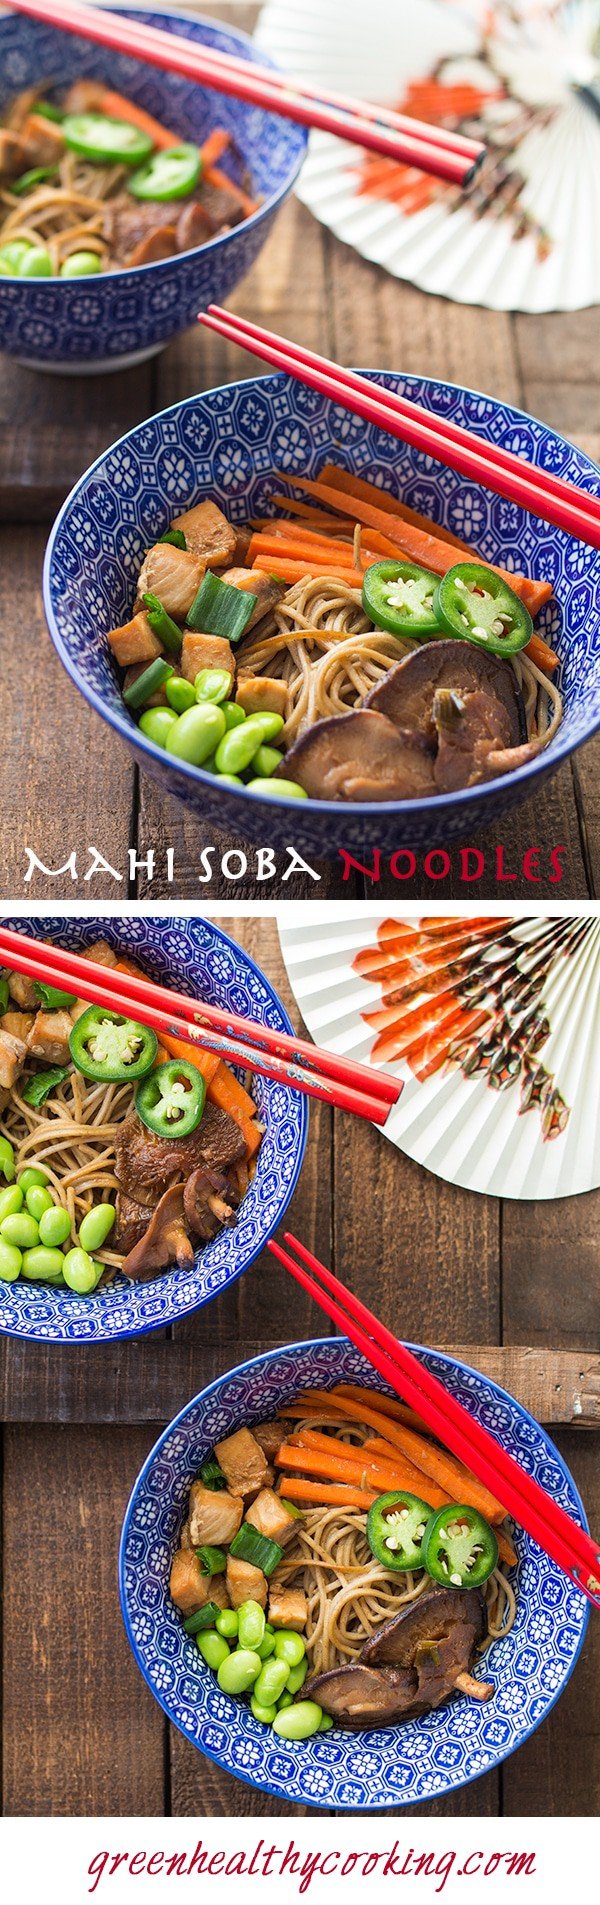 Collage of Mahi Mahi Soba Noodle Stir-Fry images with text overlay for Pinterest.